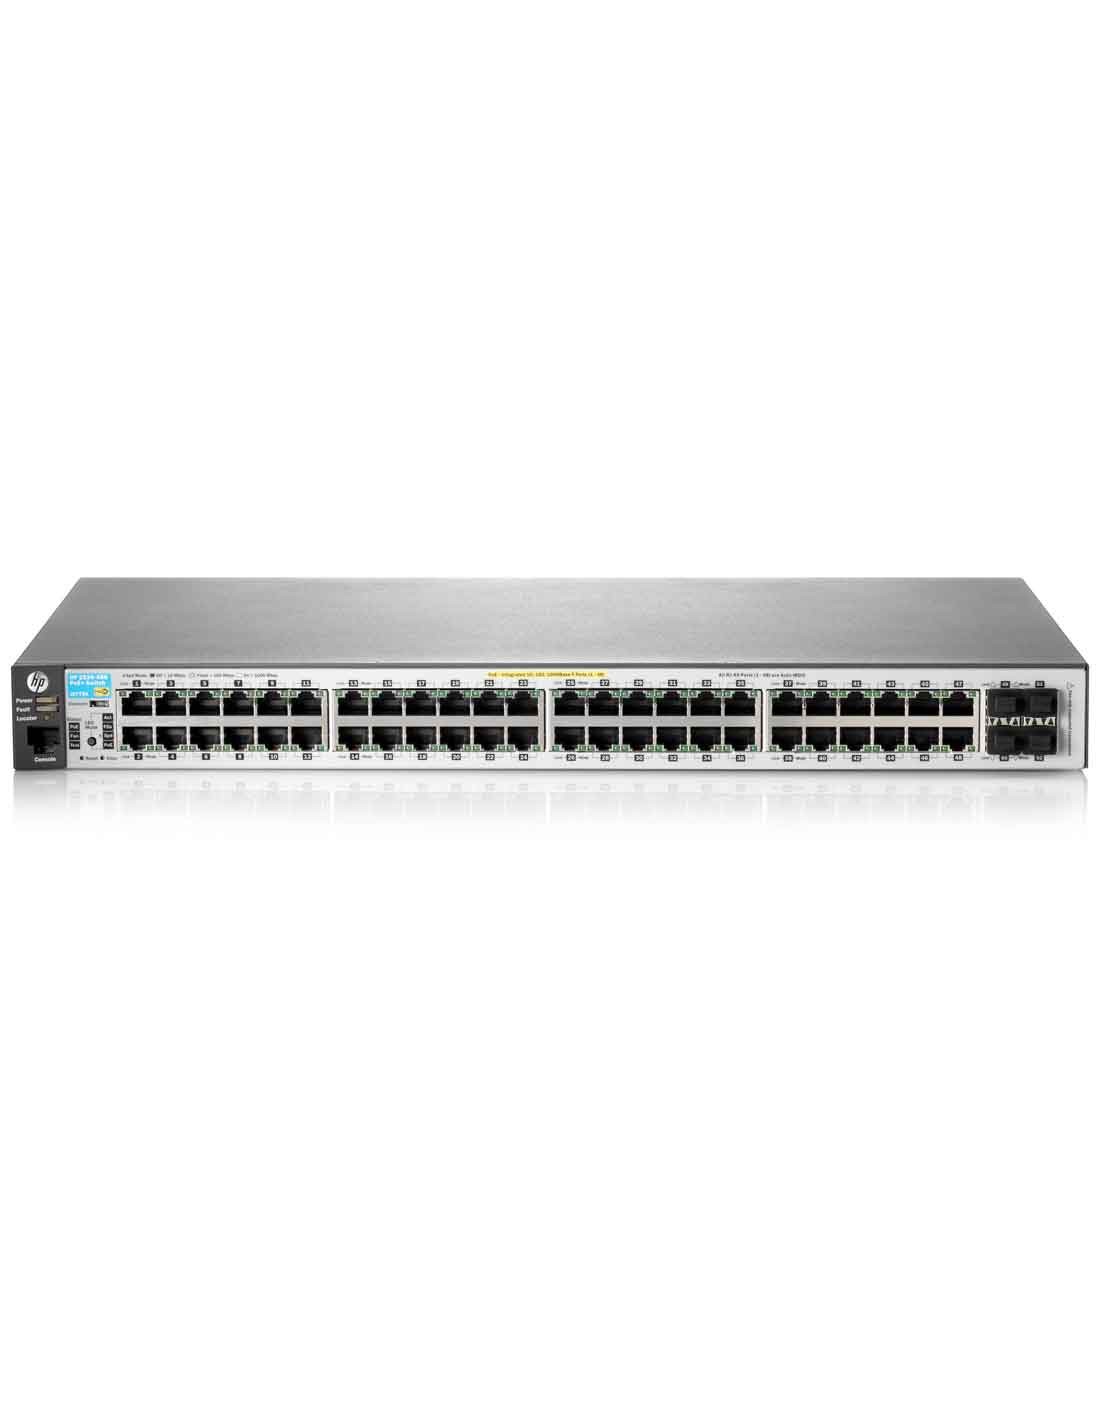 Aruba 2530 48G PoE+ Switch J9772A at a cheap price and free delivery in Dubai